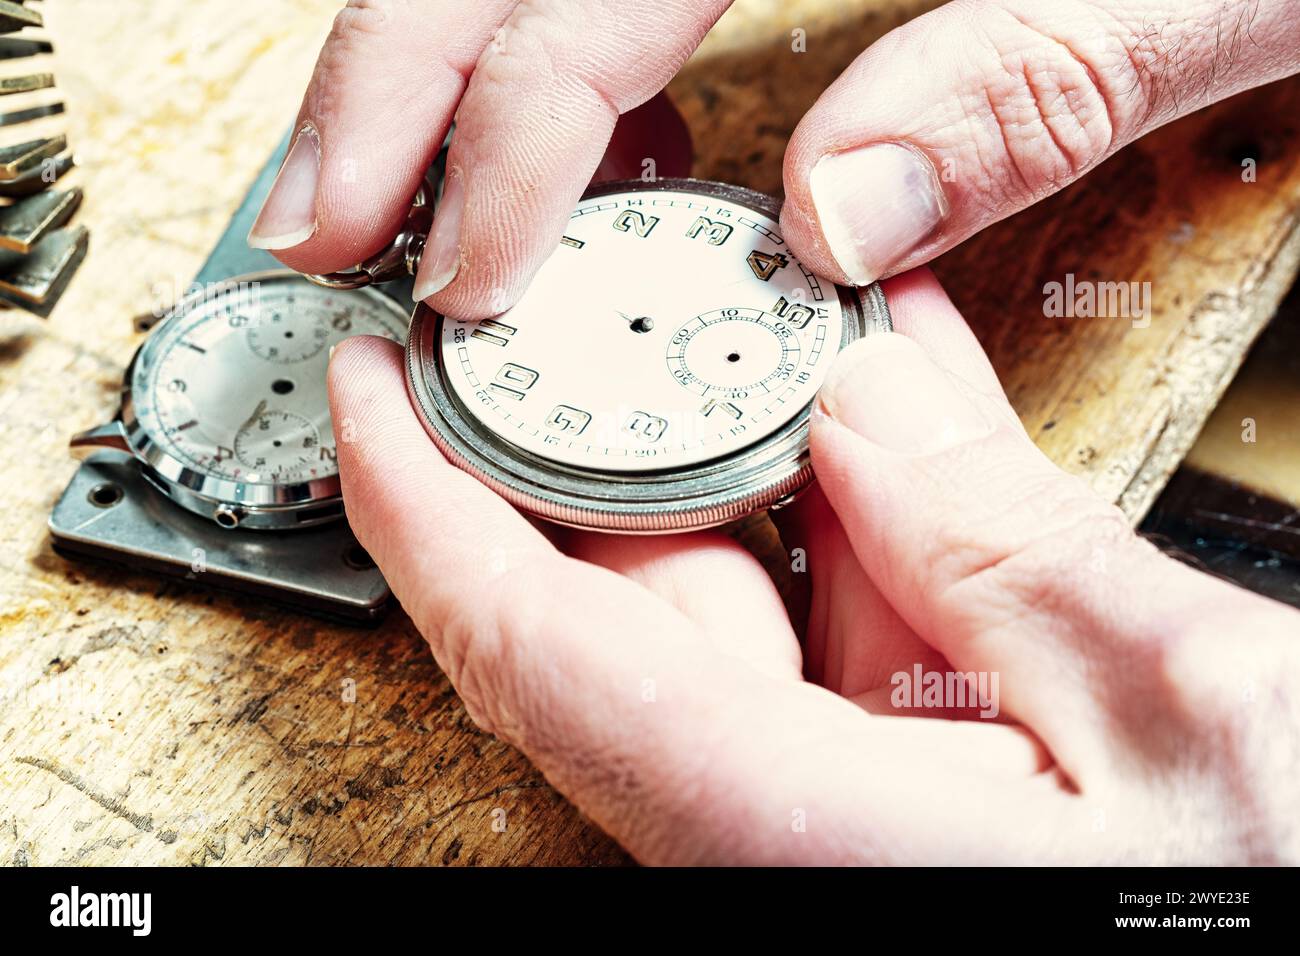 craftsman's fingers adjust the tiny mechanisms within the watch, the essence of punctuality in progress Stock Photo